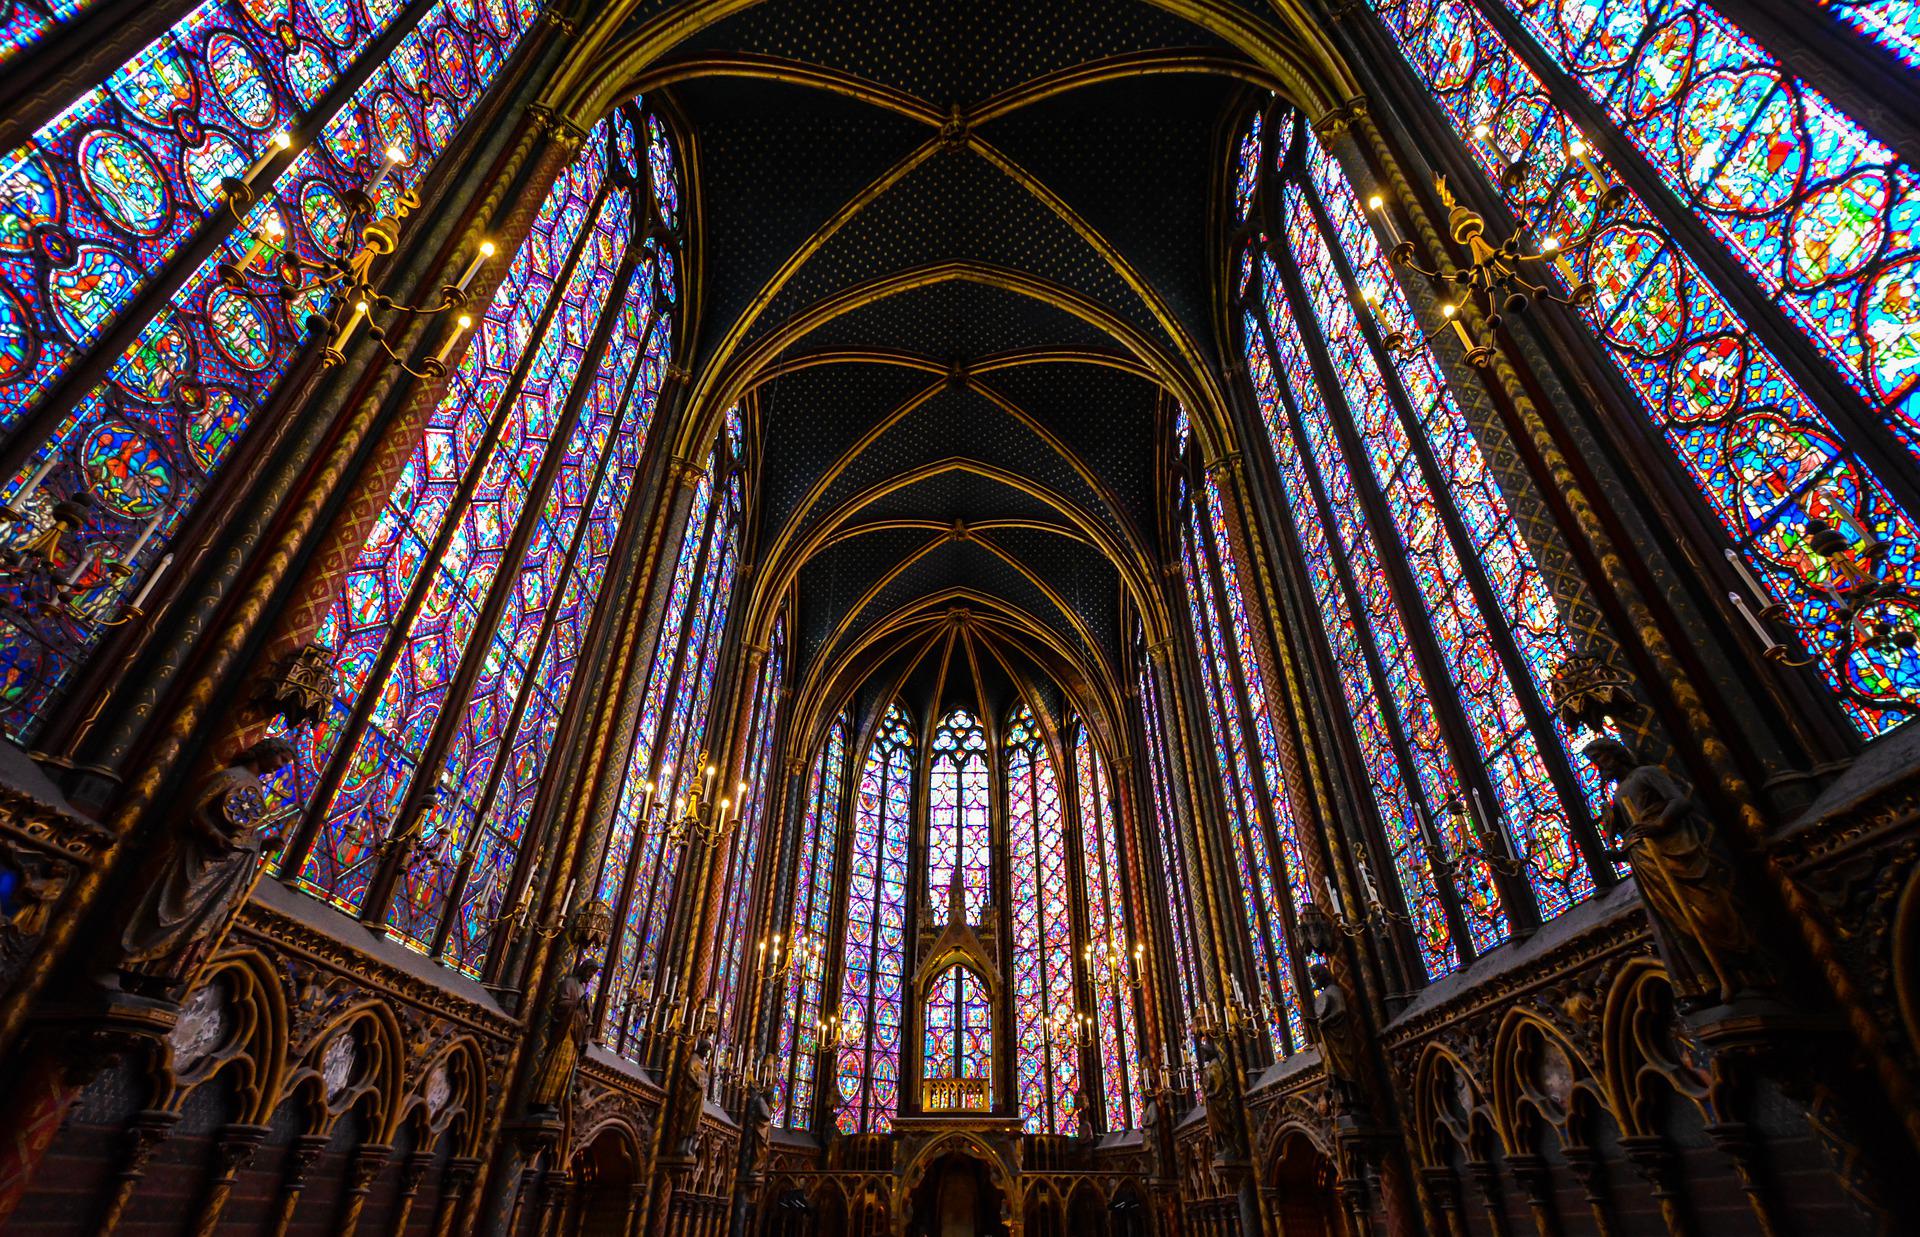 The Gothic Cathedral : A Vessel of Light on Earth